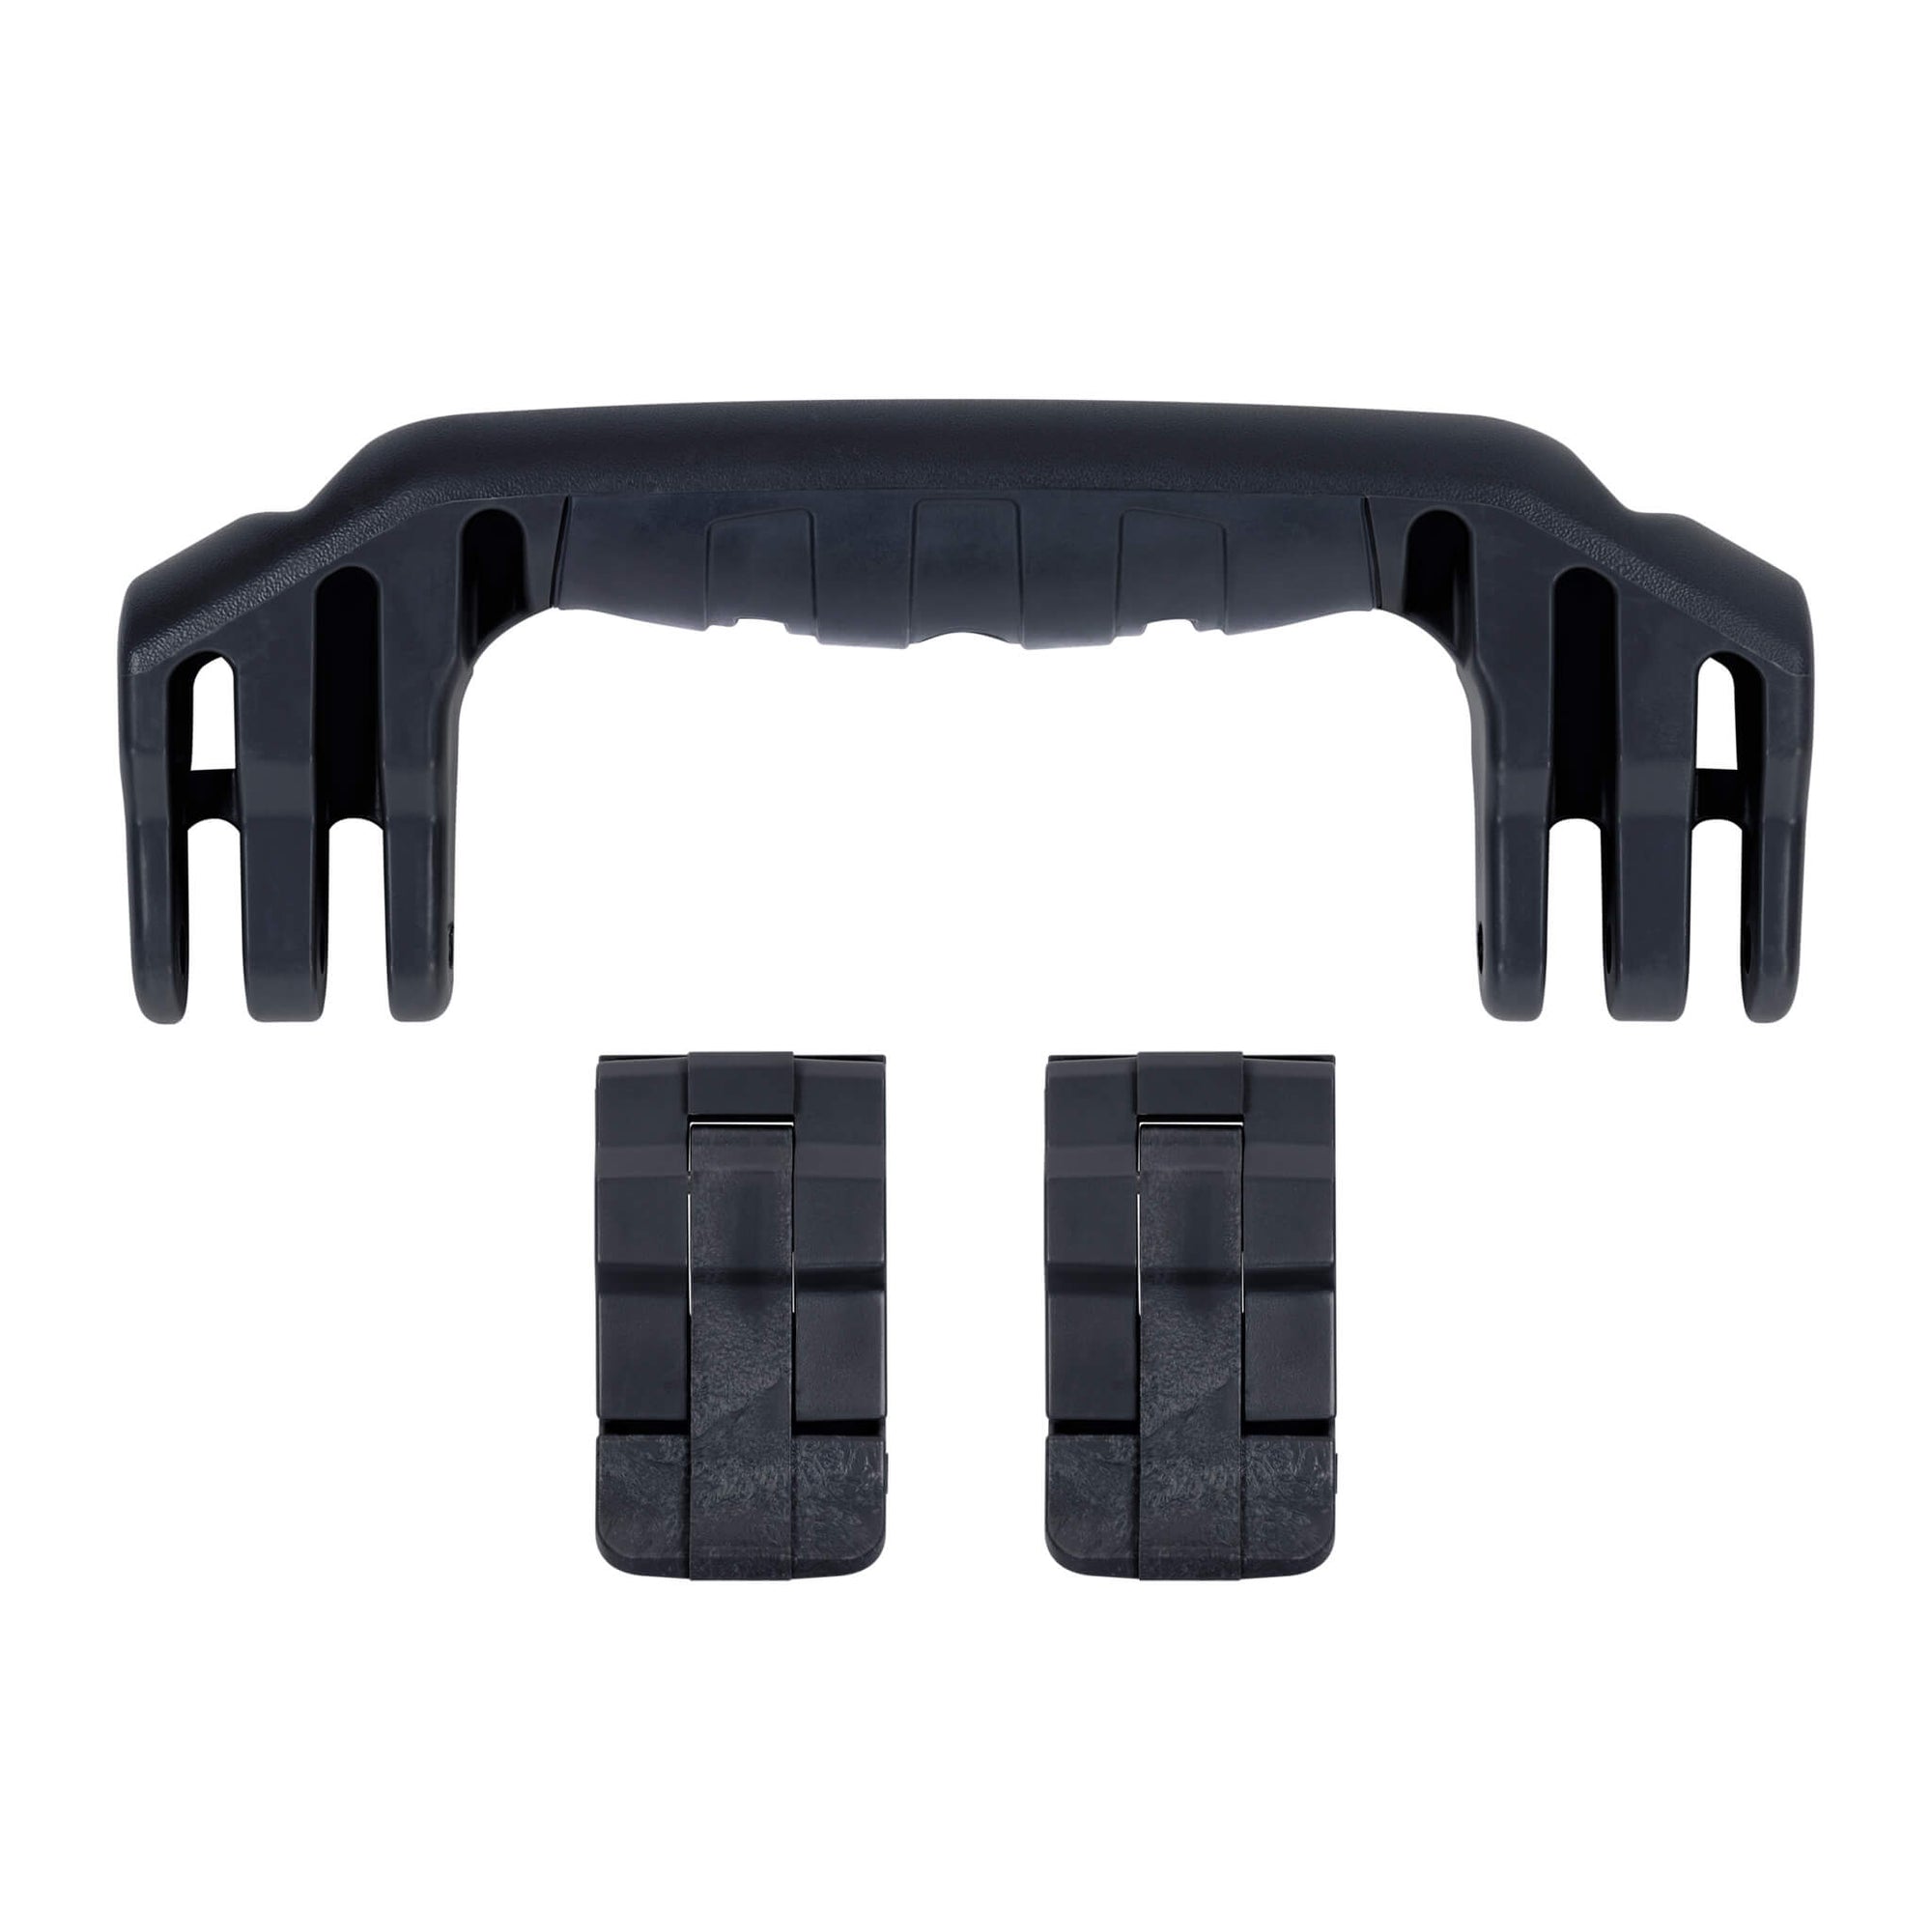 Pelican 1500 Replacement Handle & Latches, Black (Set of 1 Handle, 2 Latches) ColorCase 